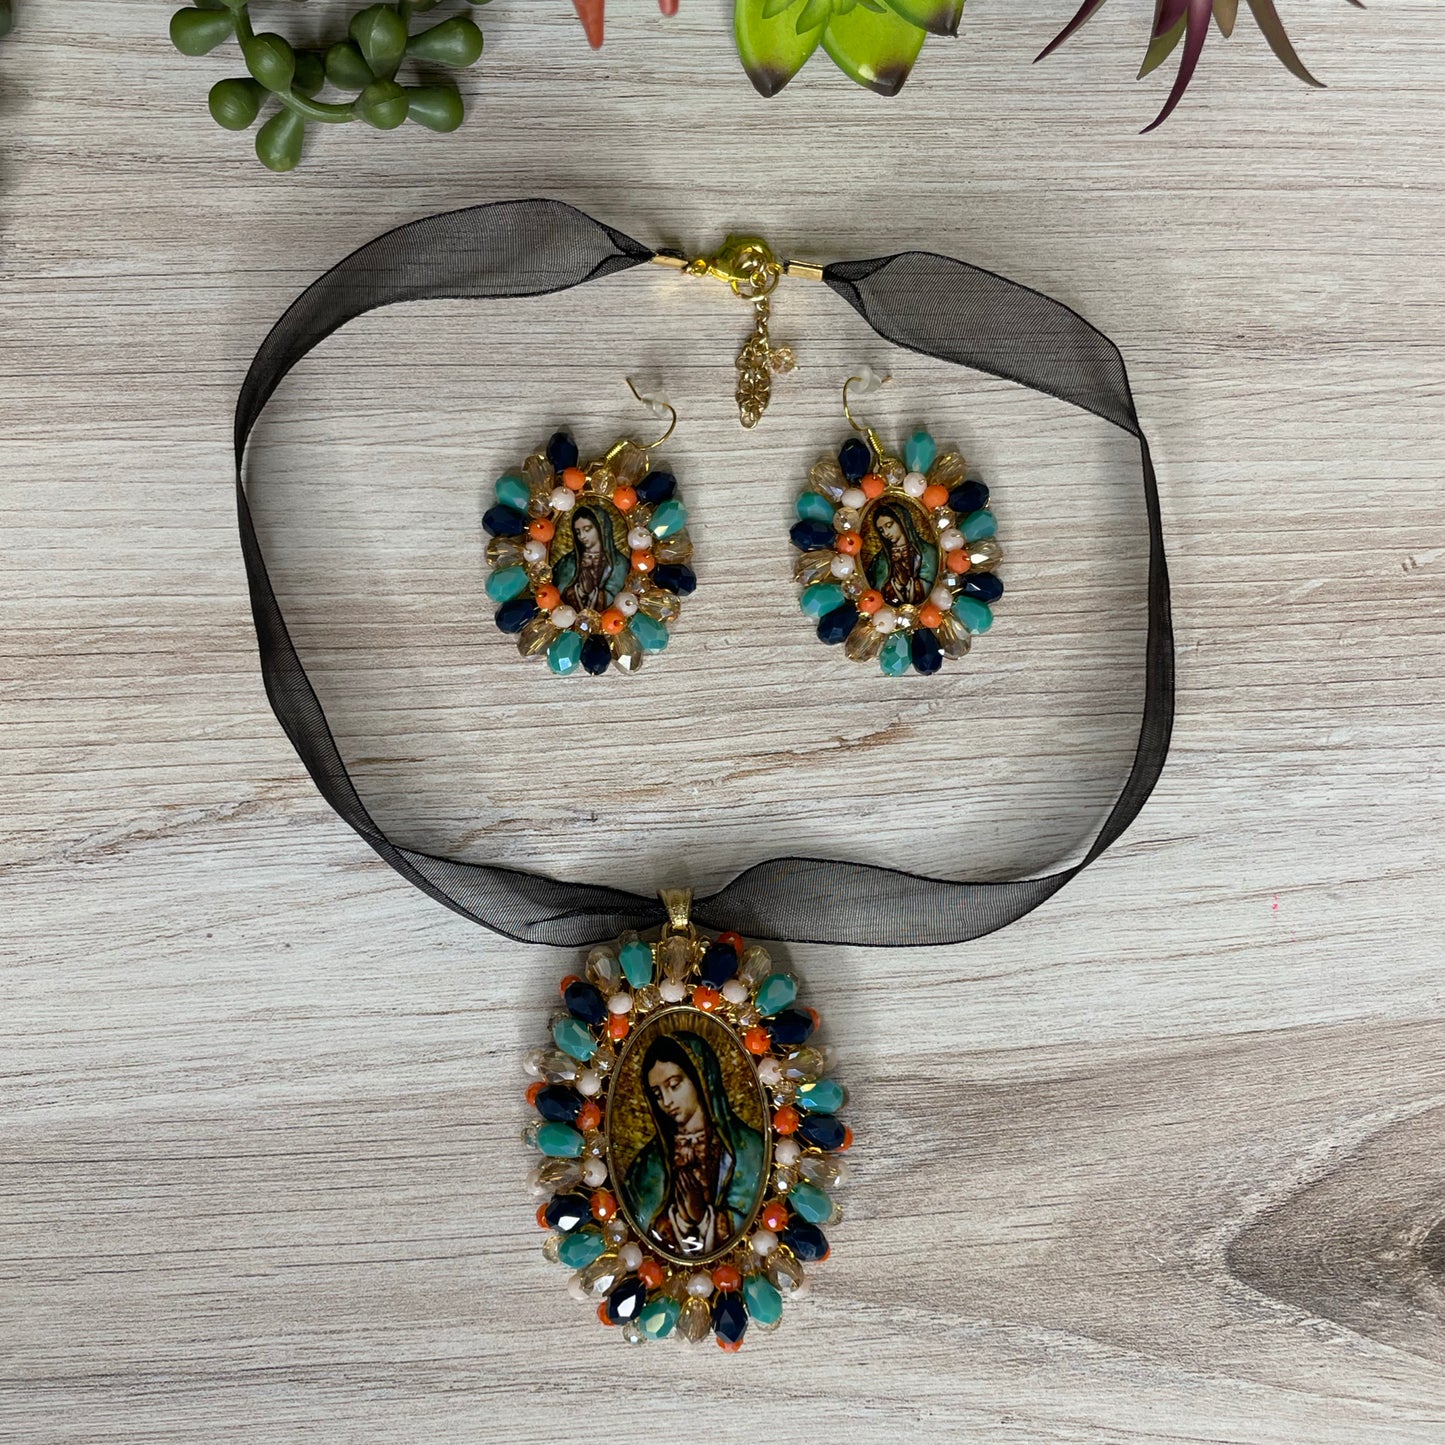 Our Lady of Guadalupe Necklace Set - Medium